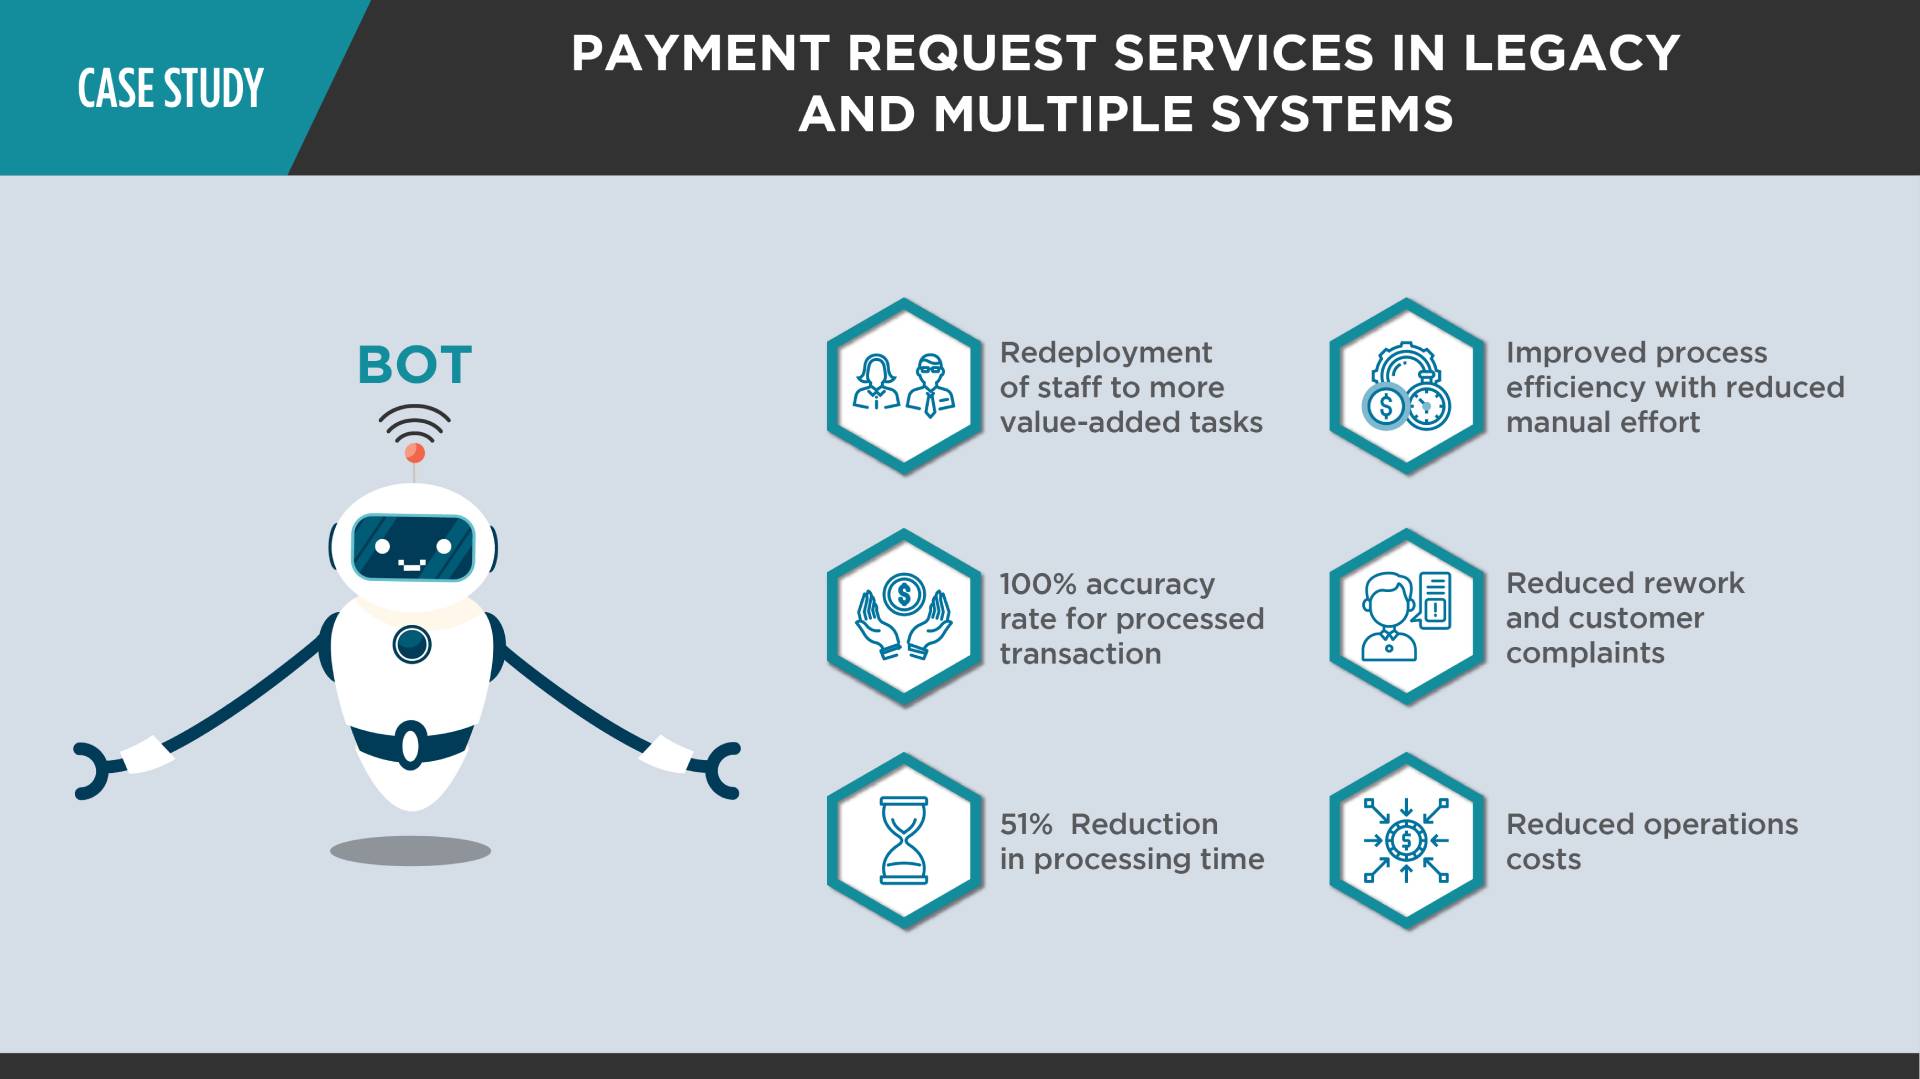 Payment Request Services in Legacy and Multiple Systems Case Study